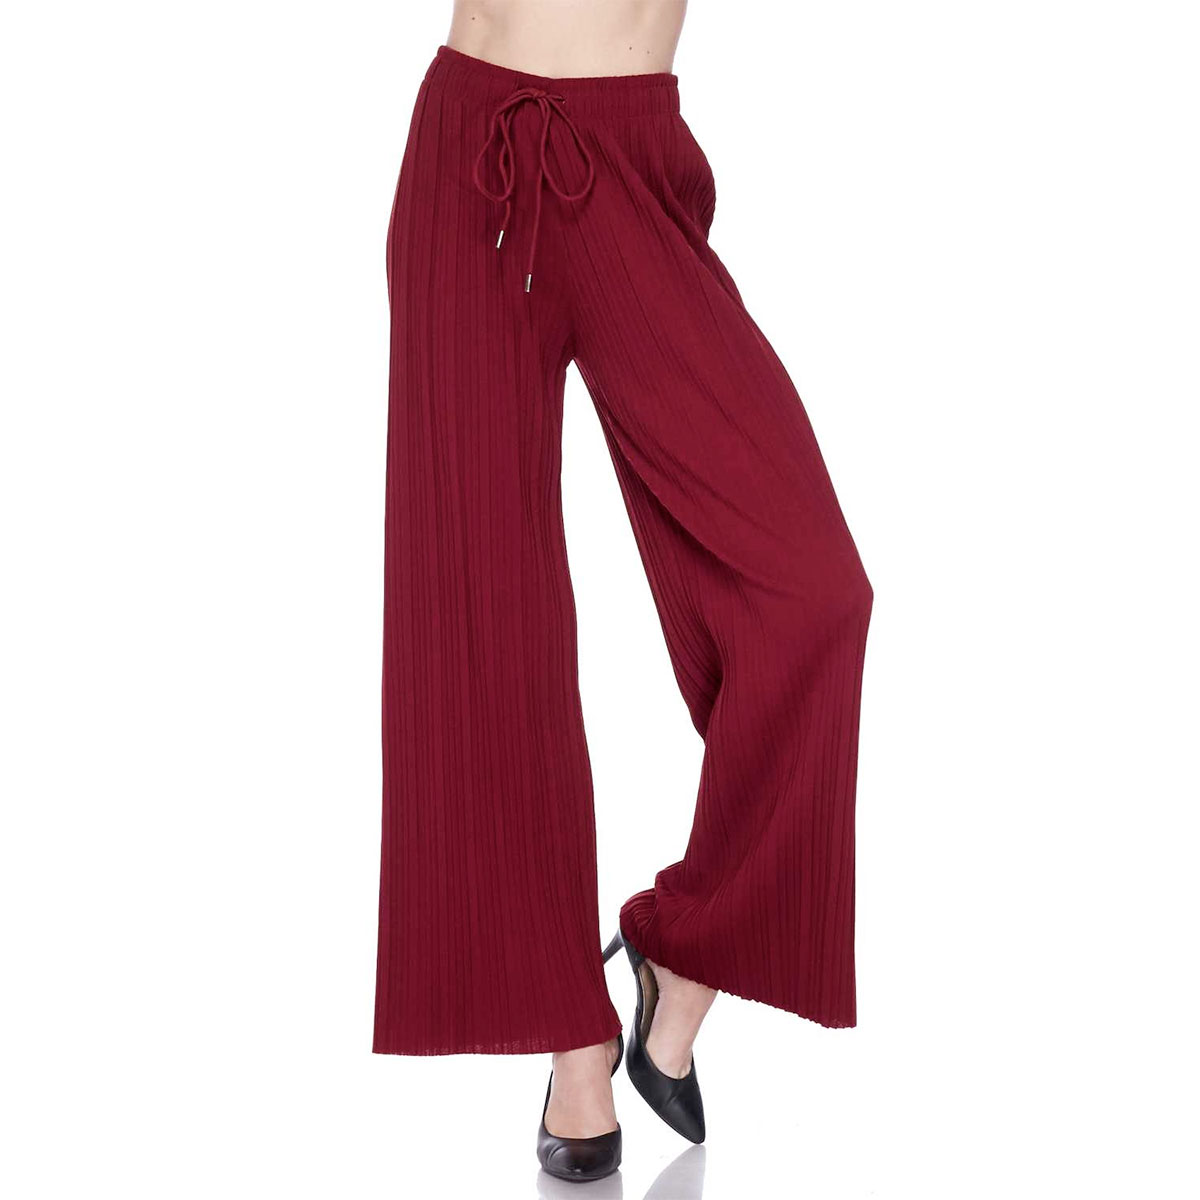 902T - Pleated (No Hem) Twill Pants Taupe<br>
Stretch Twill Pleated Wide Leg Pants - One Size Fits S-L